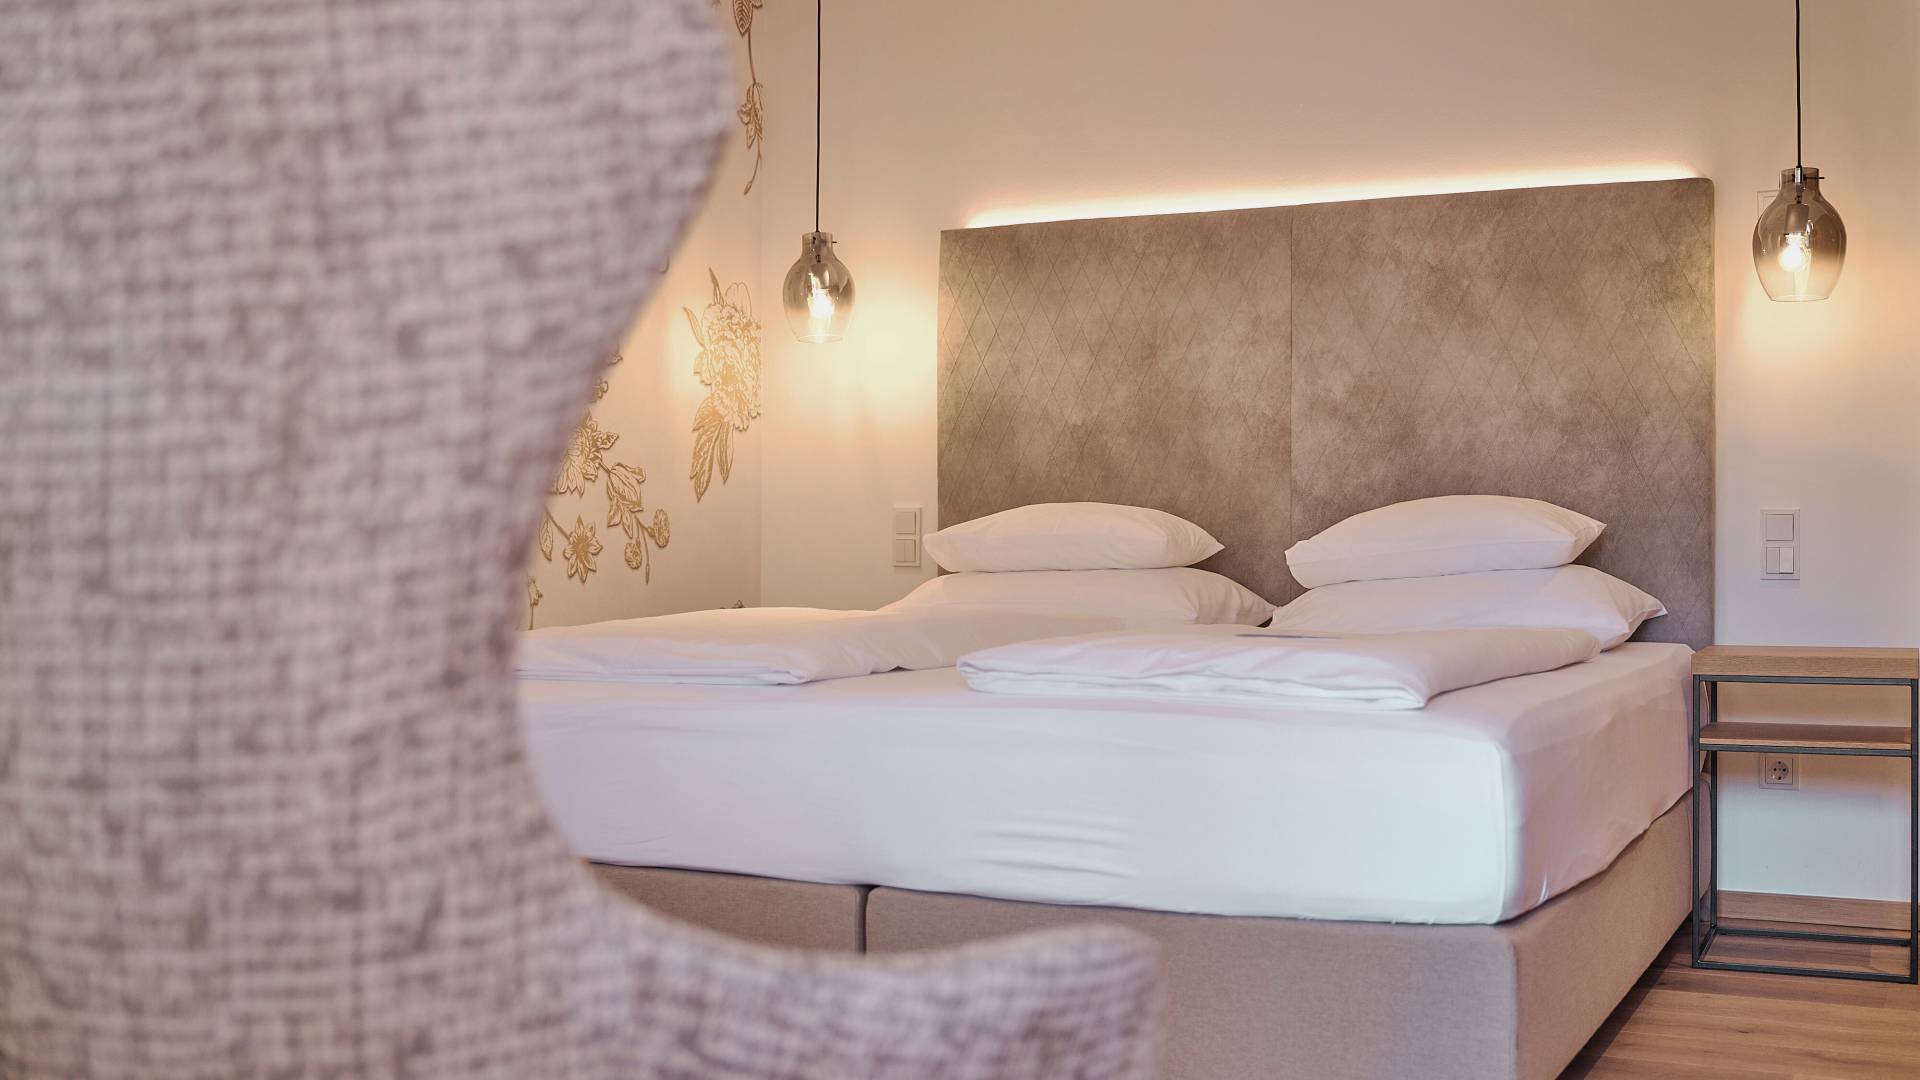 Bed in the hotel room of the HOCHKÖNIGIN with stylish lamps and noble wallpaper with golden flowers